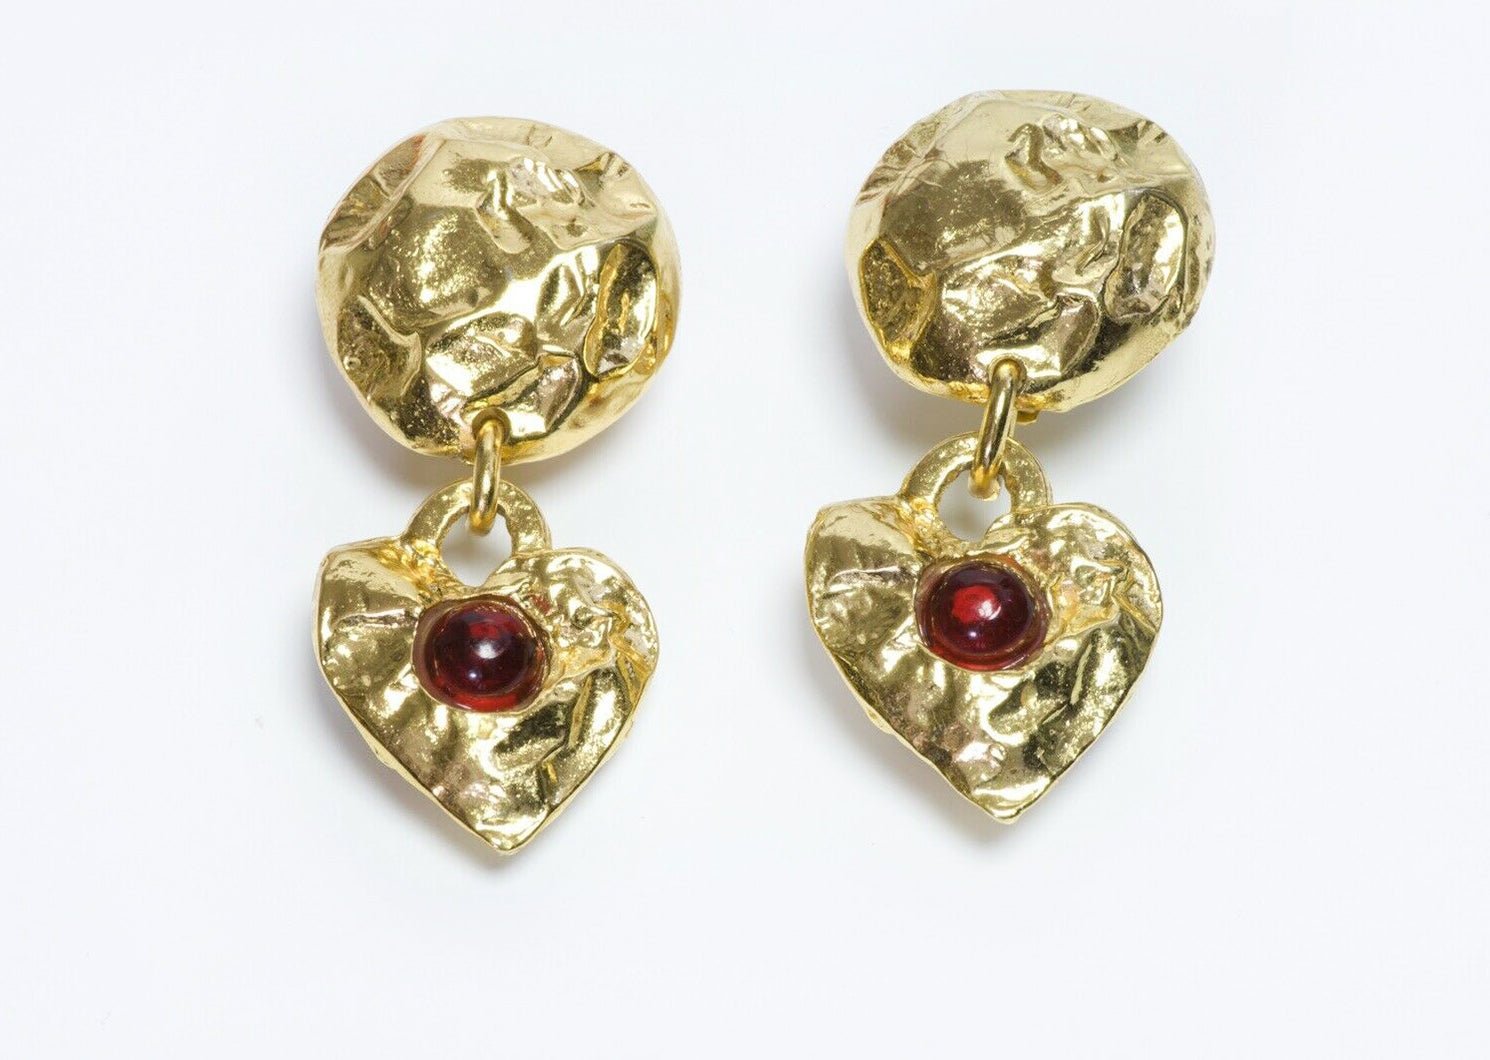 Edouard Rambaud Paris Hammered Red Cabochon Glass Heart Earrings